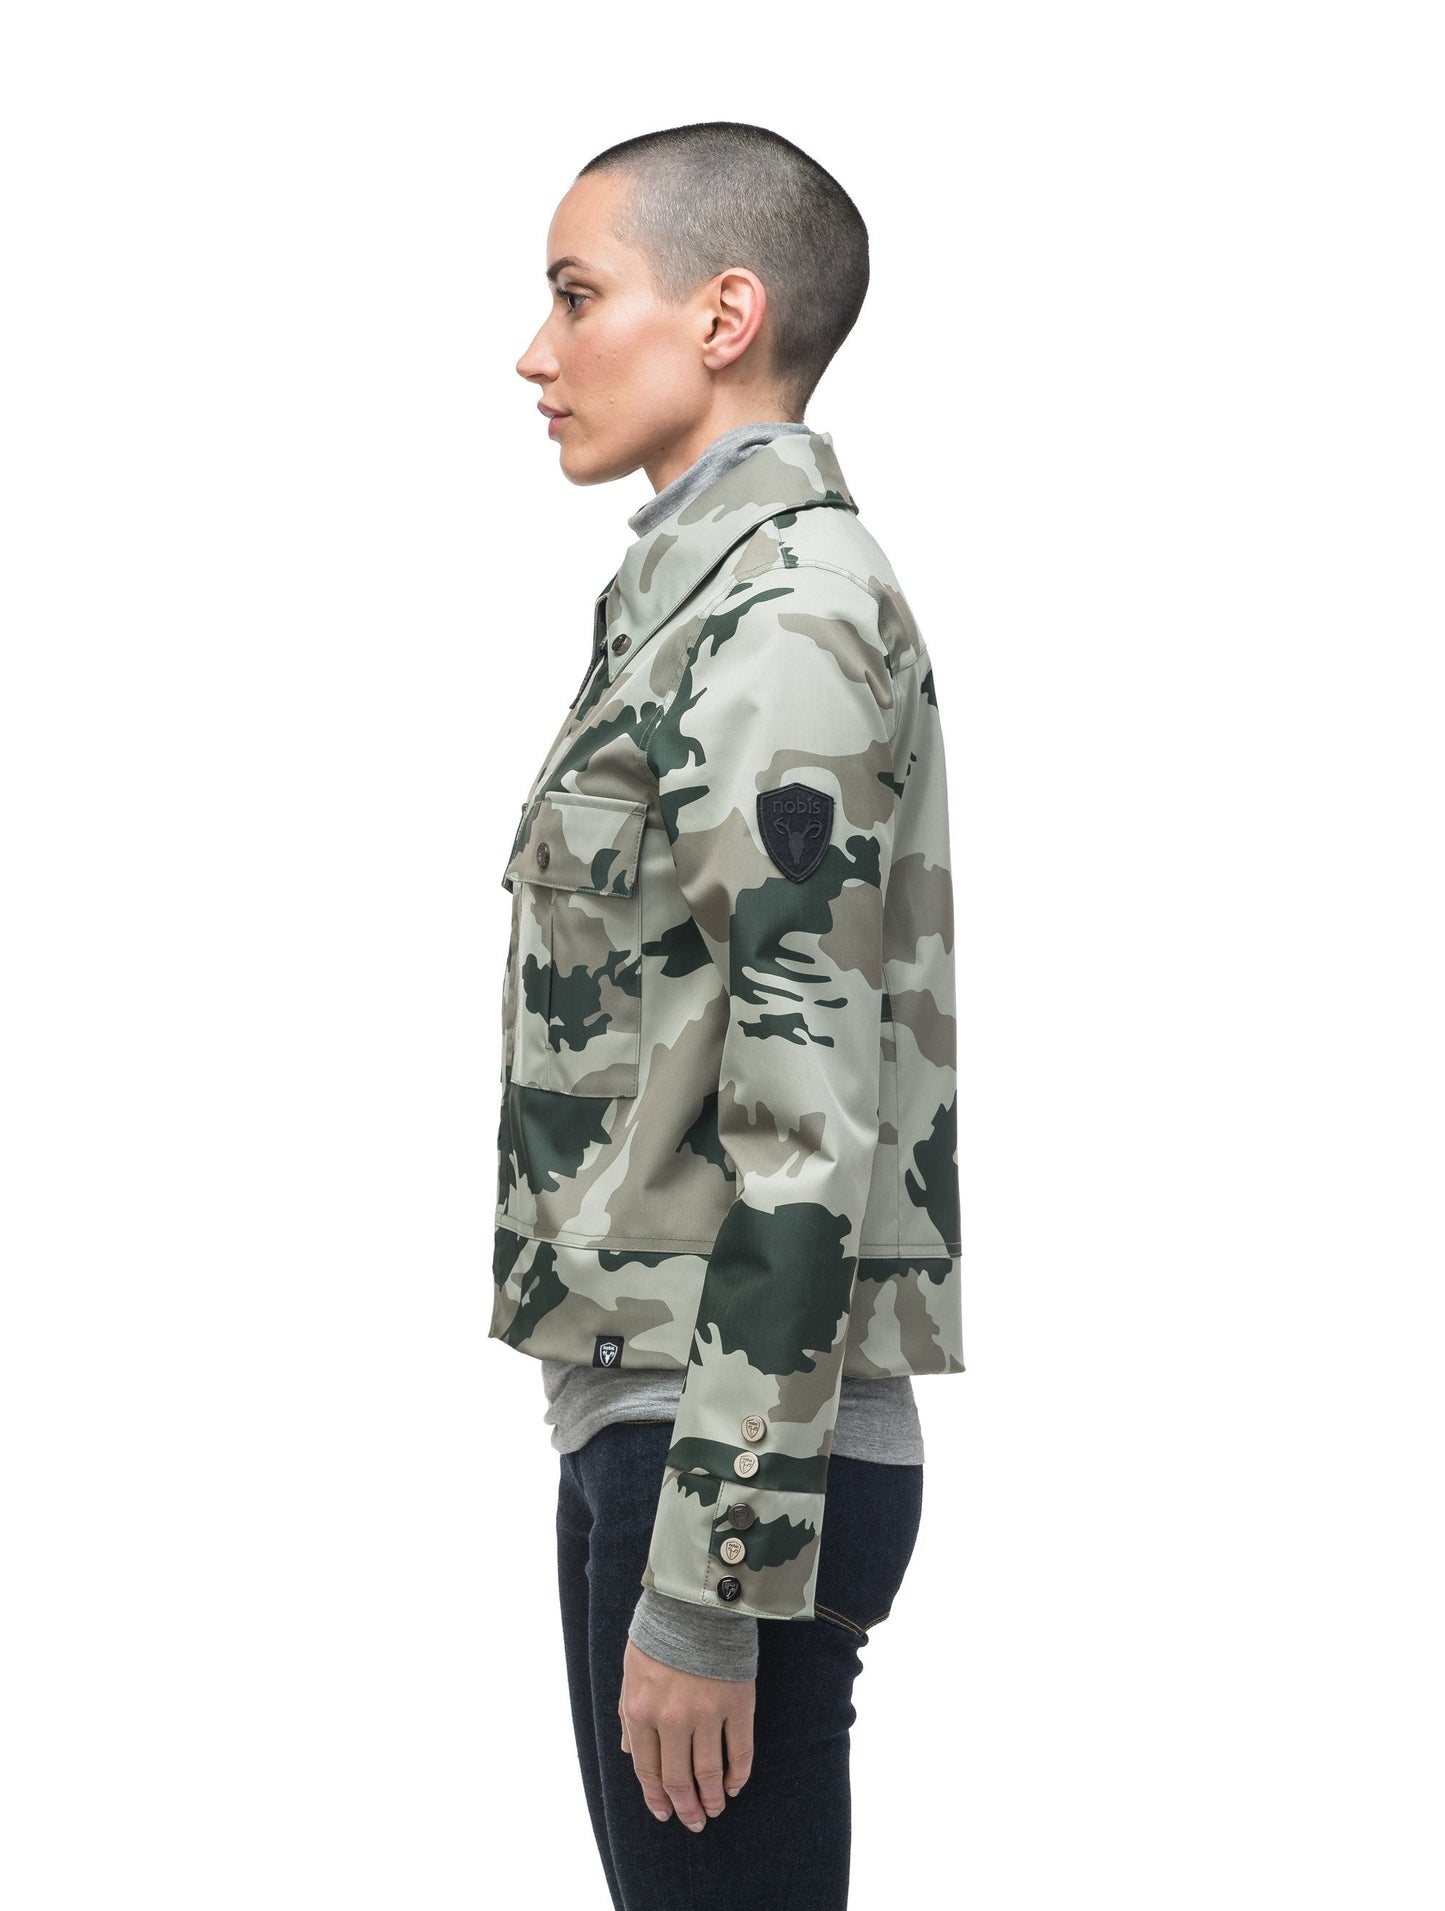 Women's cropped military inspired jacket with shirt collar detail in Army Green Camo